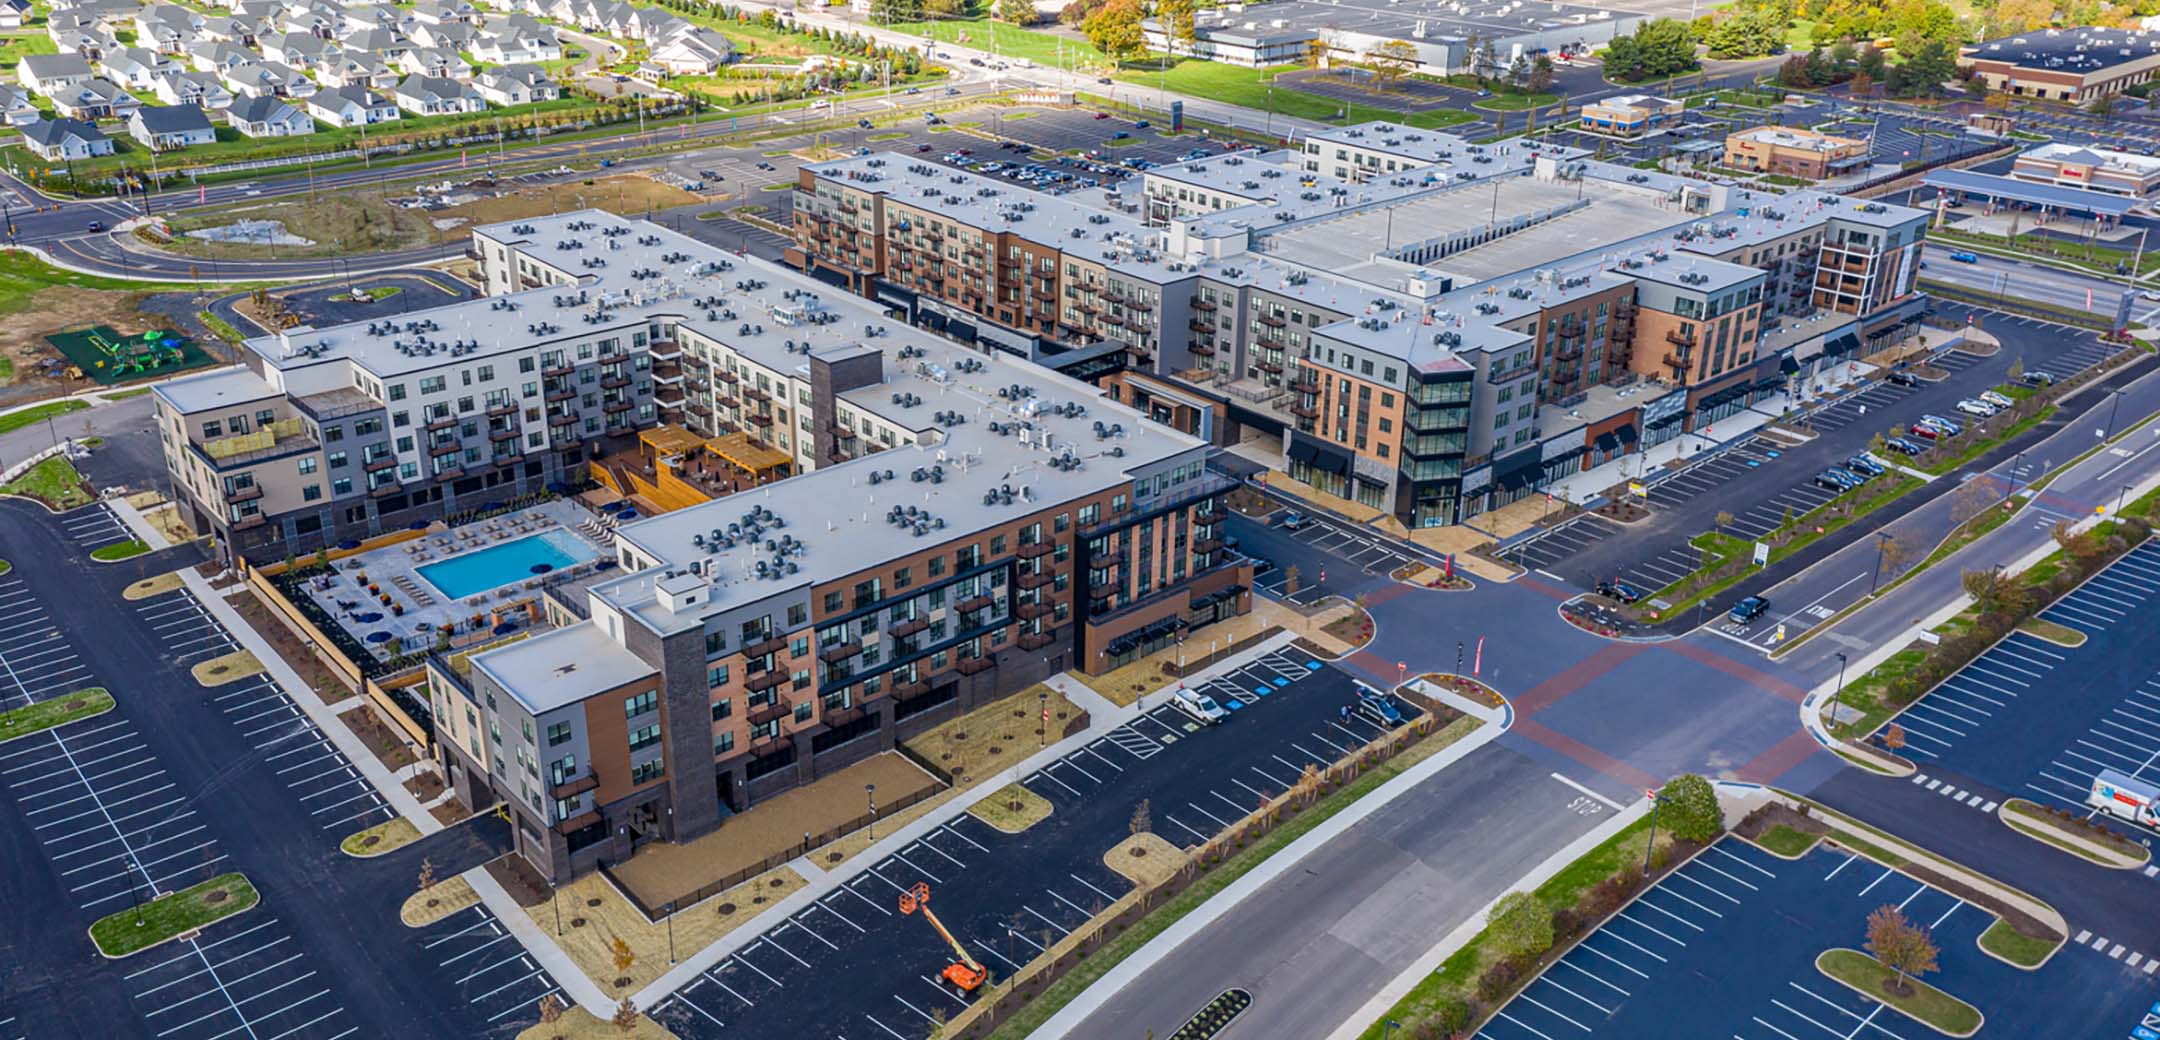 An aerial shot of the Promenade at Upper Dublin building, showcasing the large layout, parking amendments, and general area.